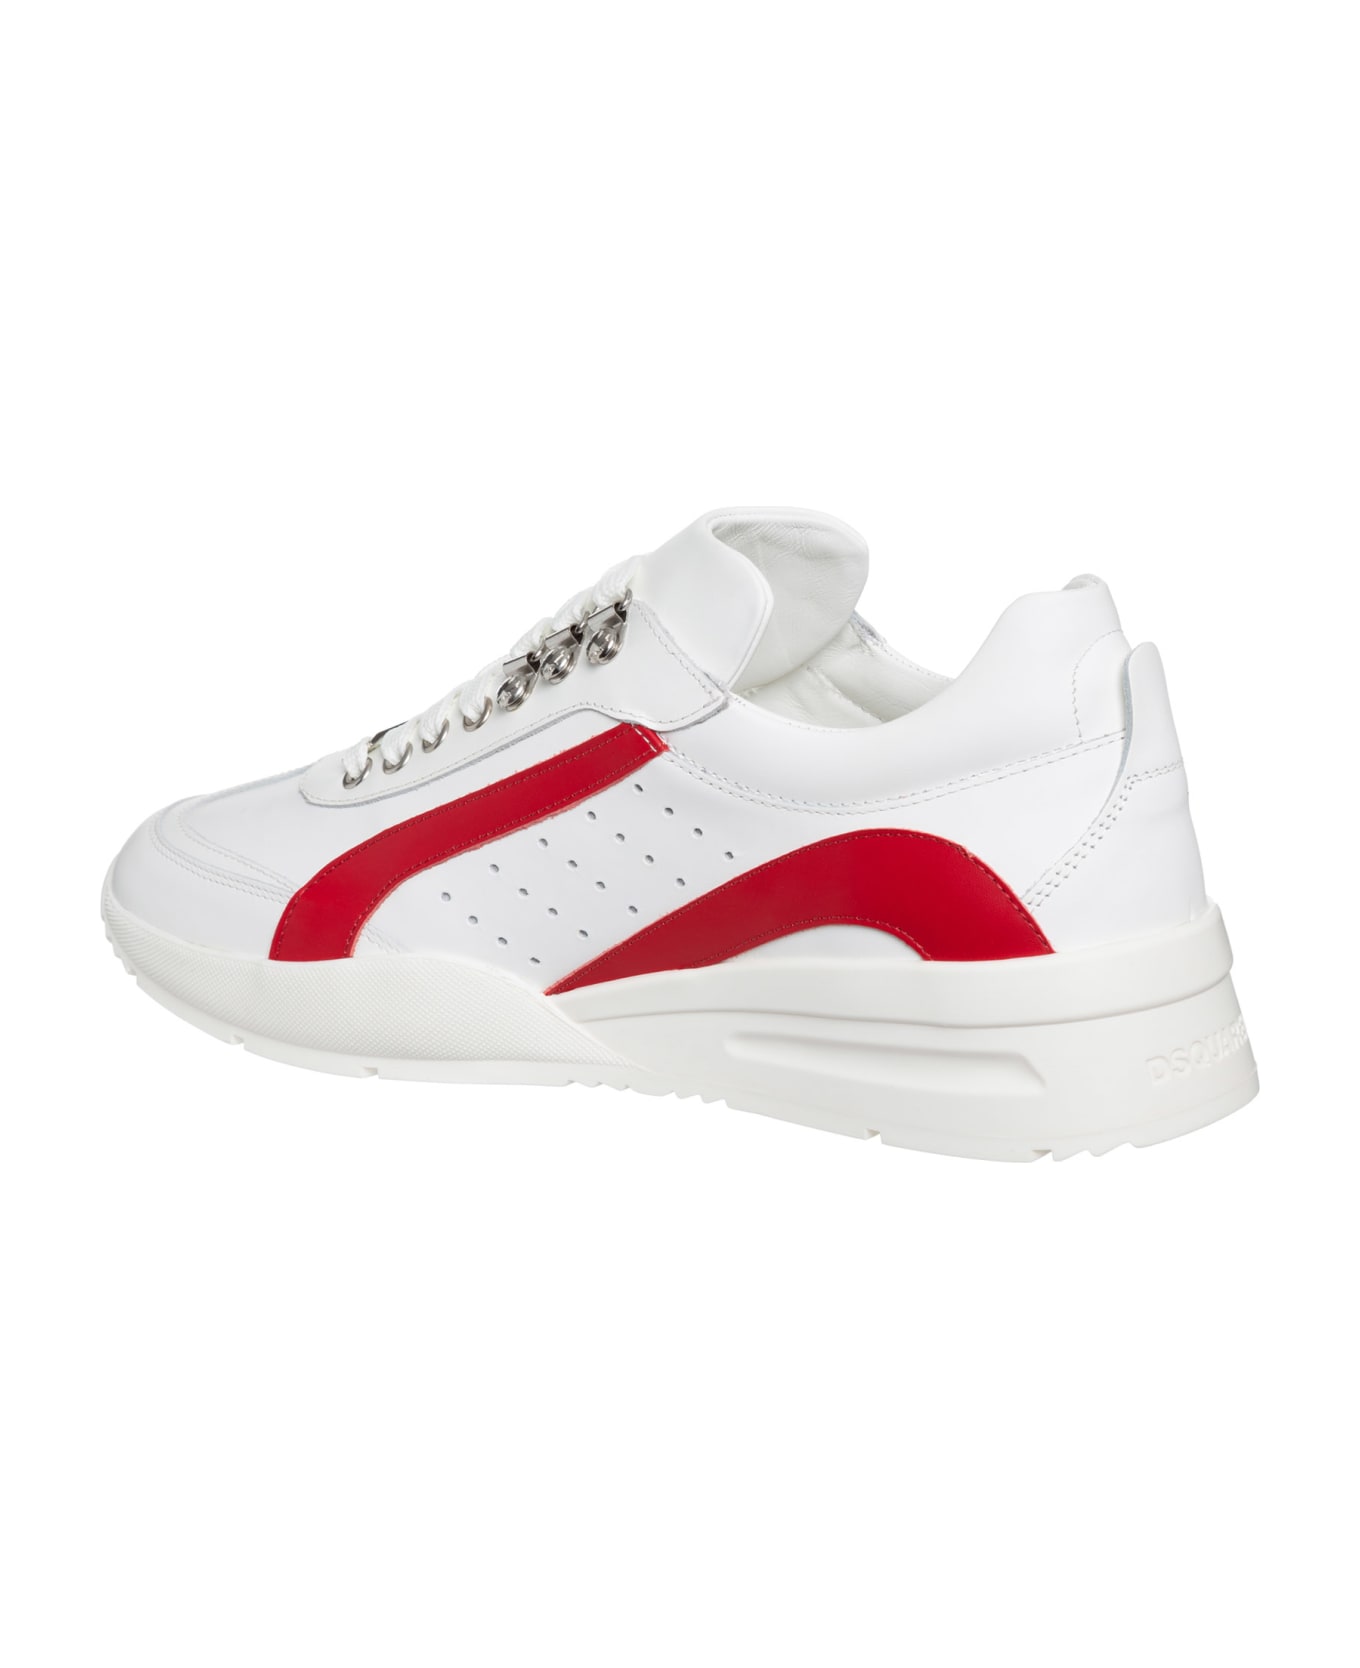 Dsquared2 Legend Leather Sneakers - White - Red